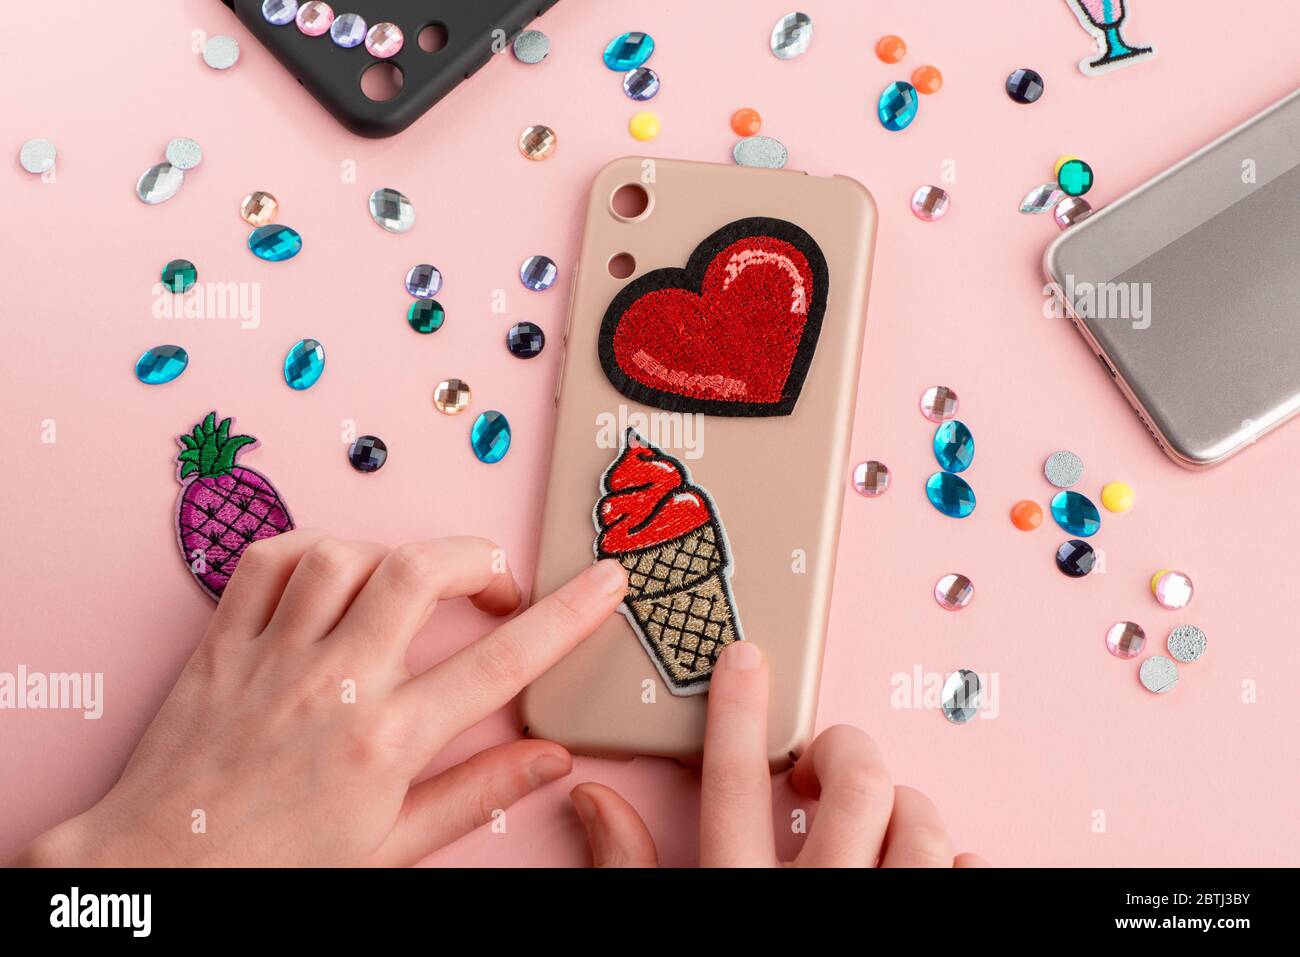 Girl putting red heart and ice cream patches onto beige phone case Stock Photo